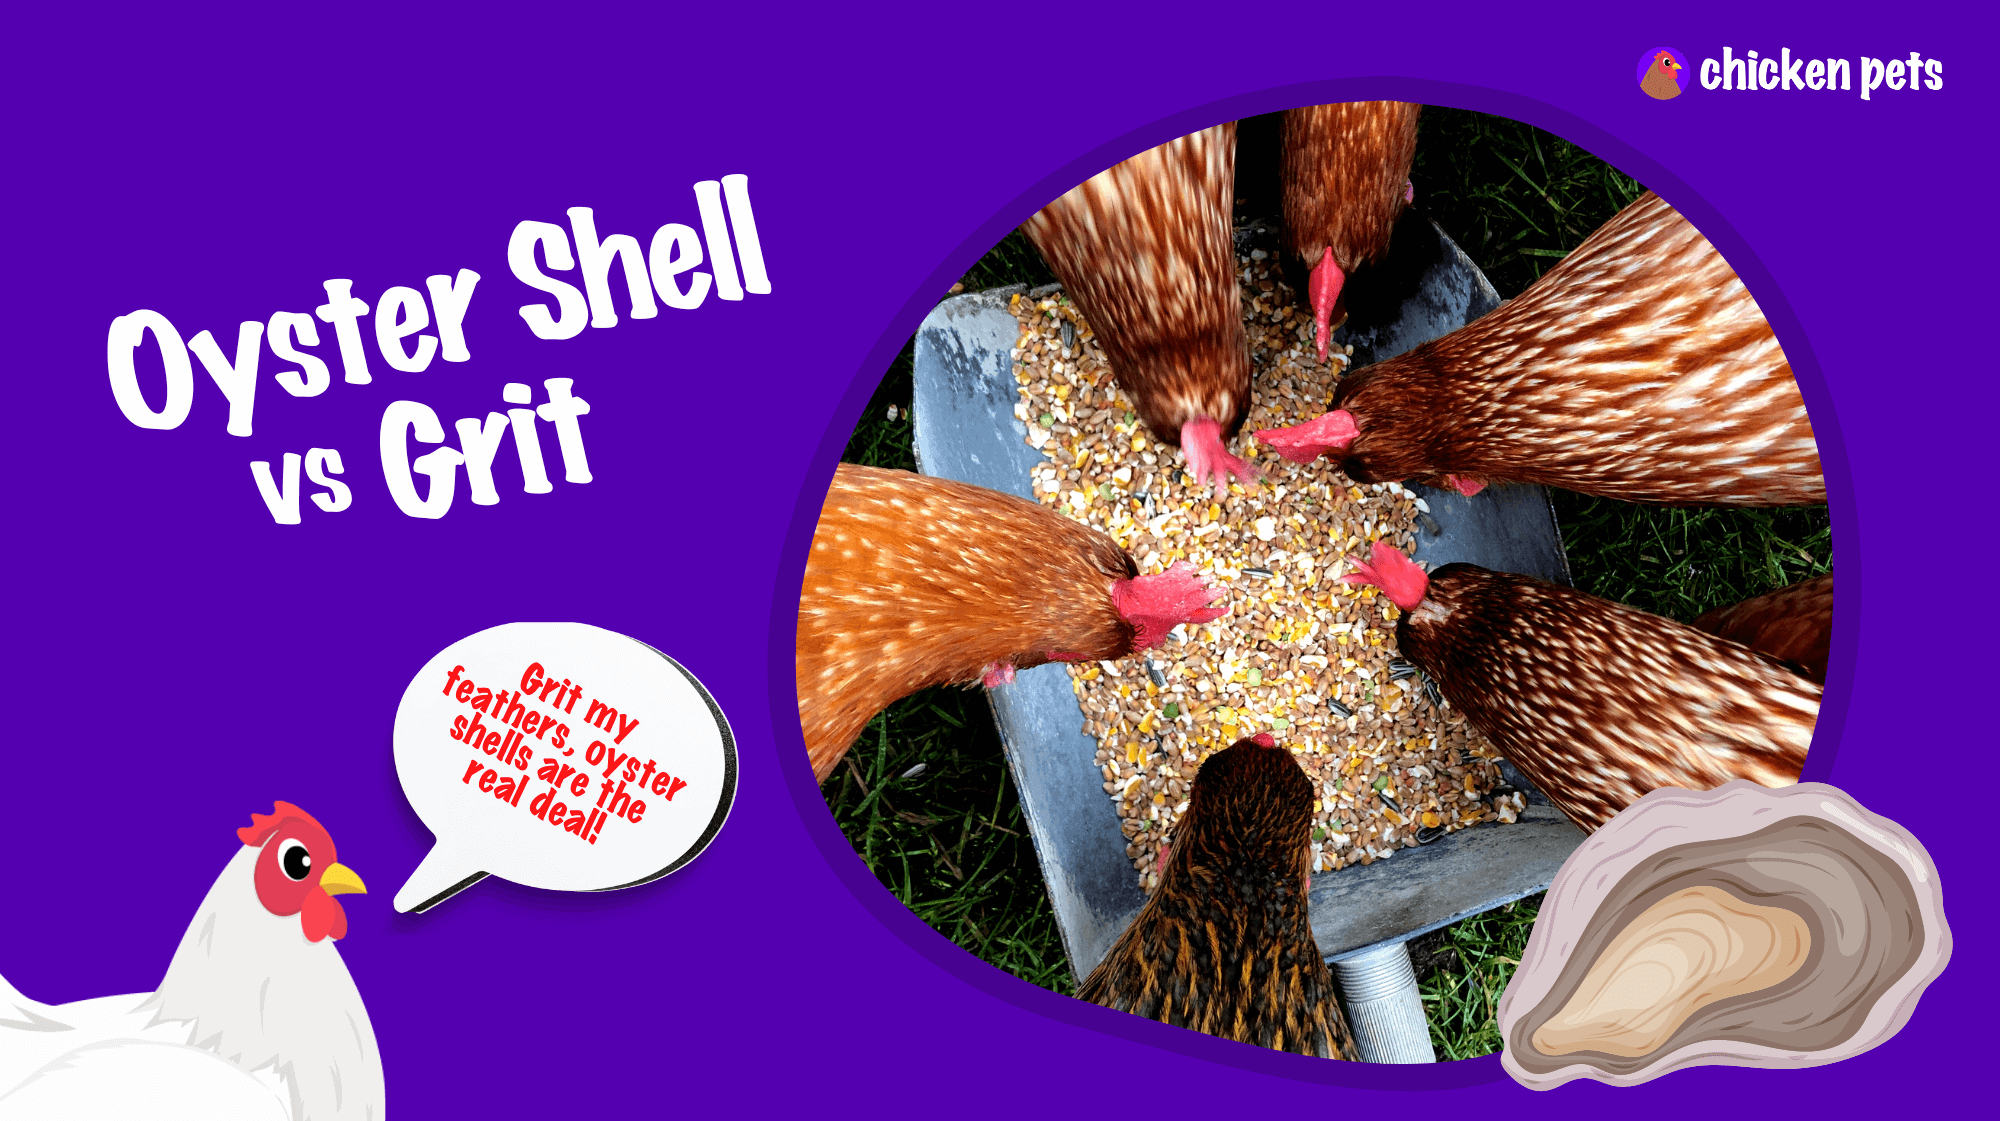 Oyster shell vs grit for your chickens